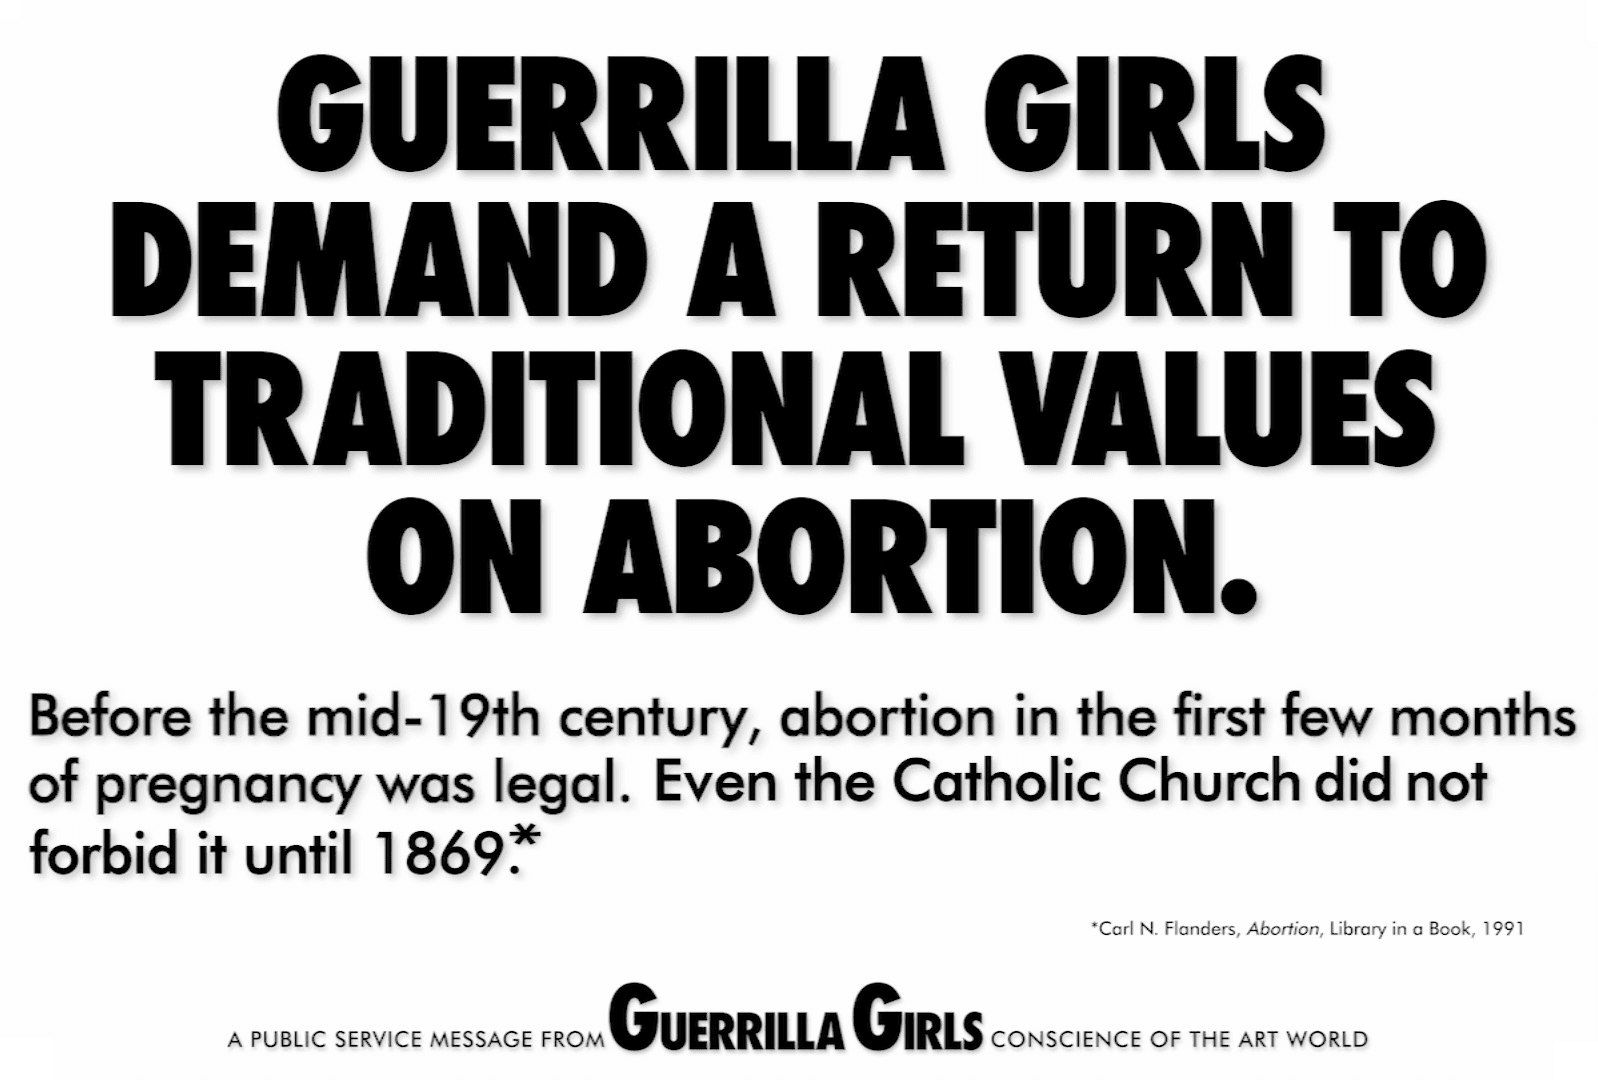 Guerrilla Girls Demand a Return to Traditional Values on Abortion 3/50